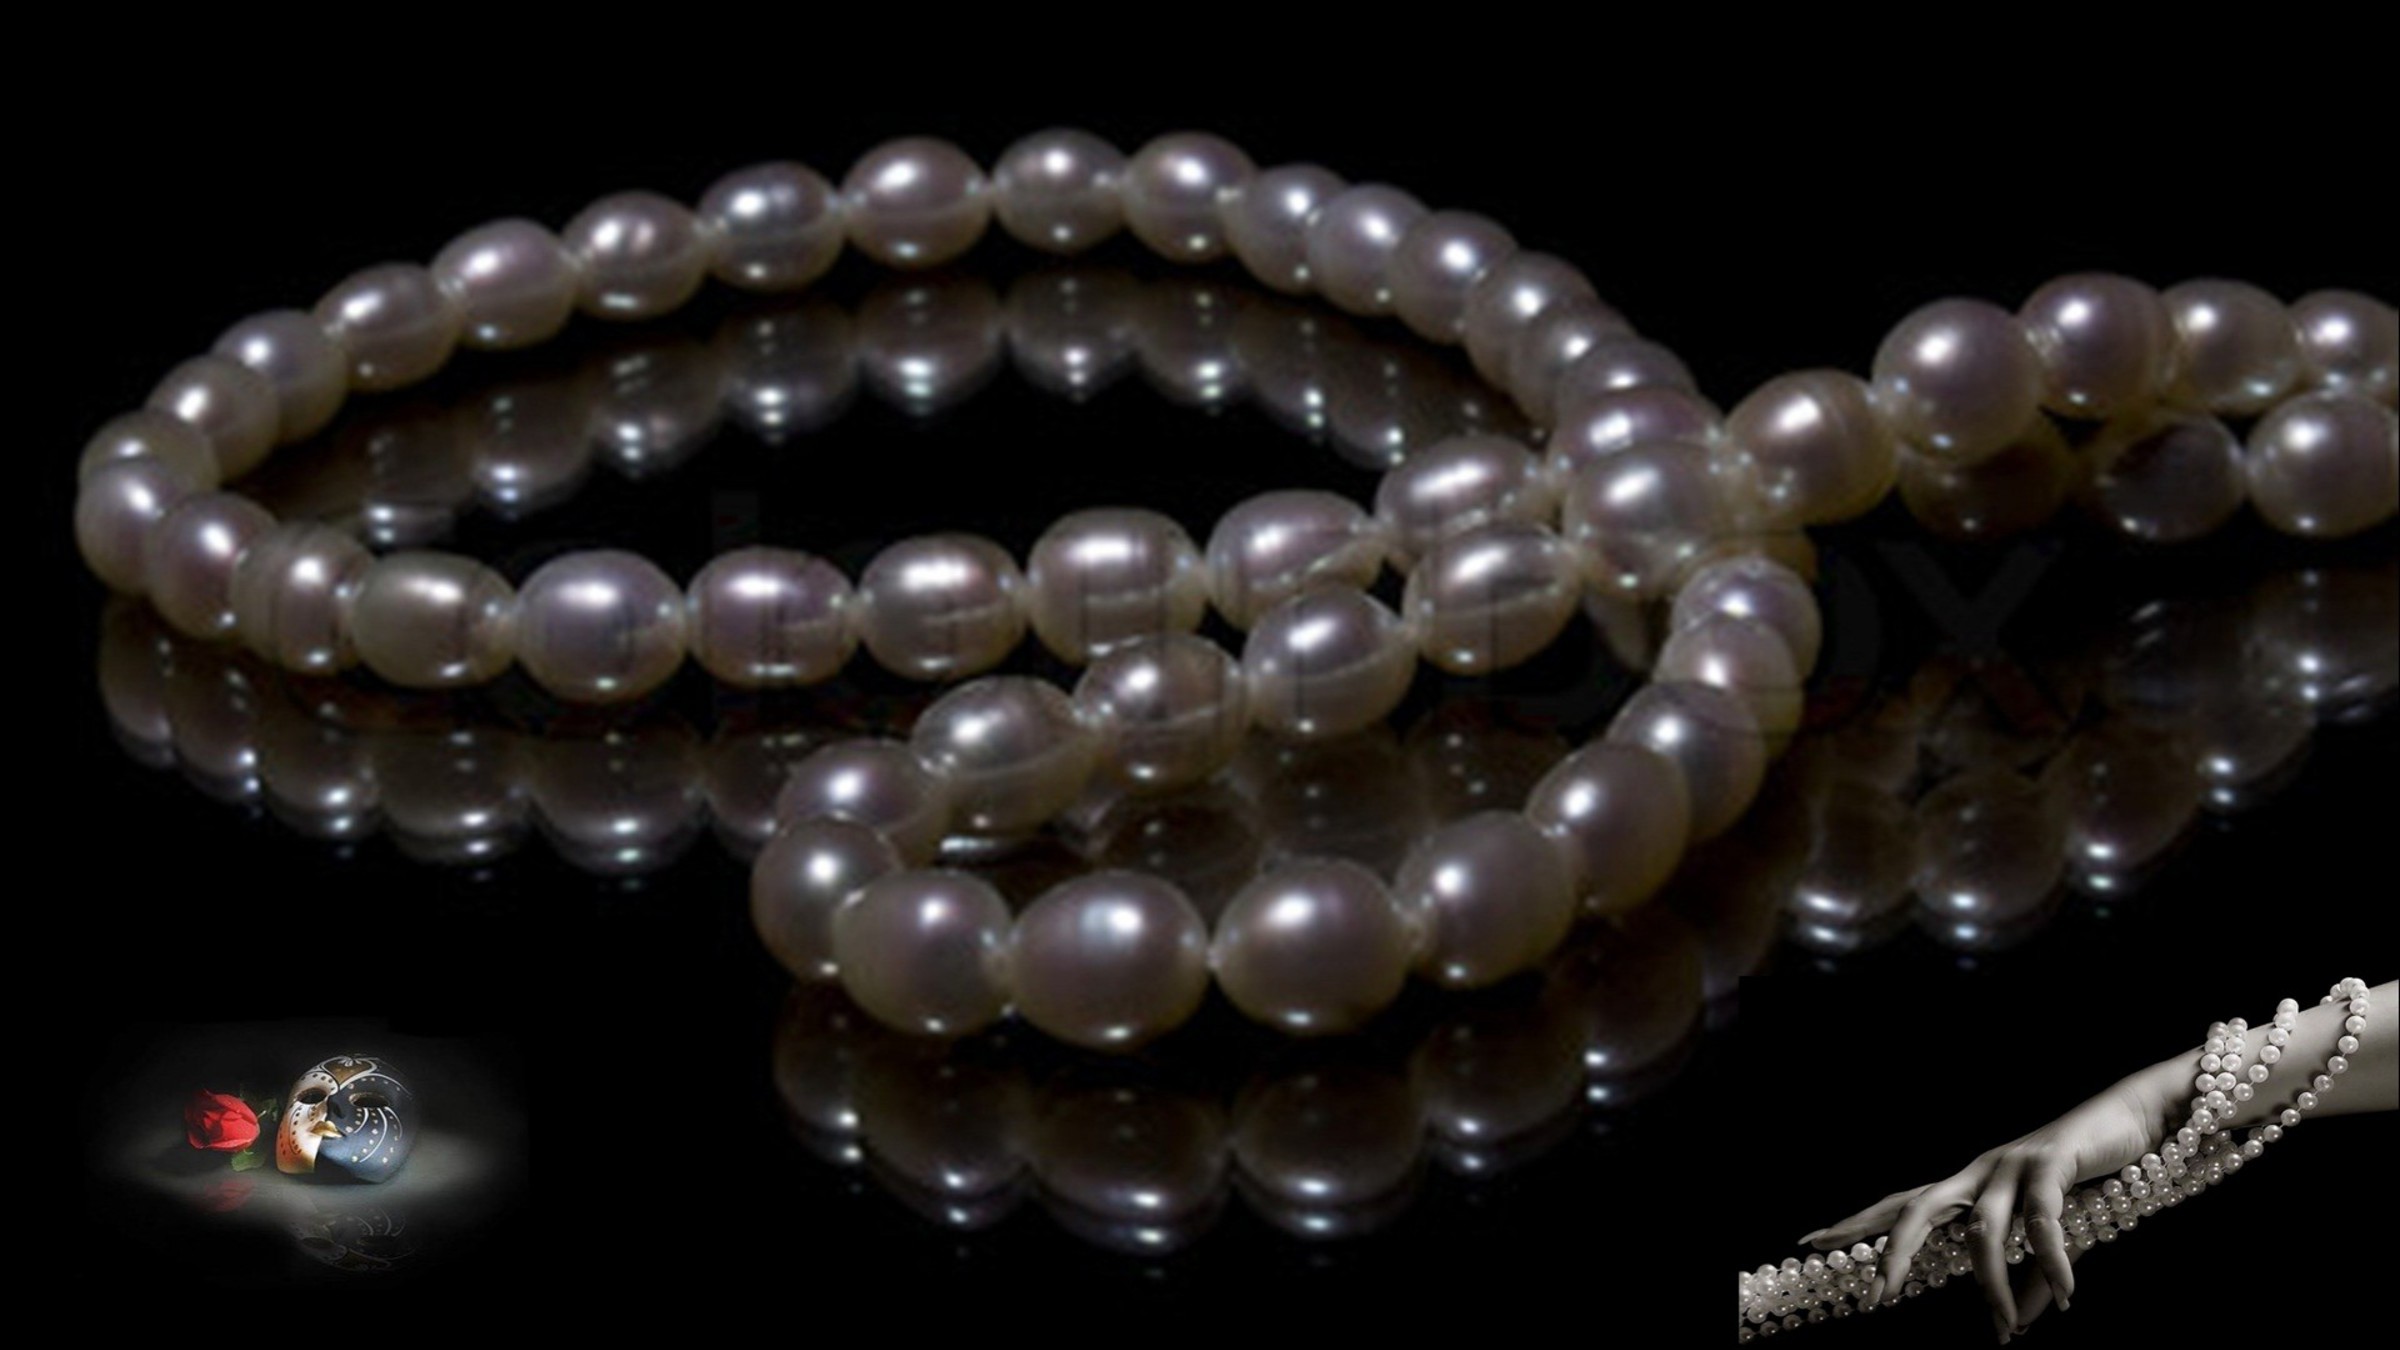 2400x1350 Necklace from pearls wallpaper